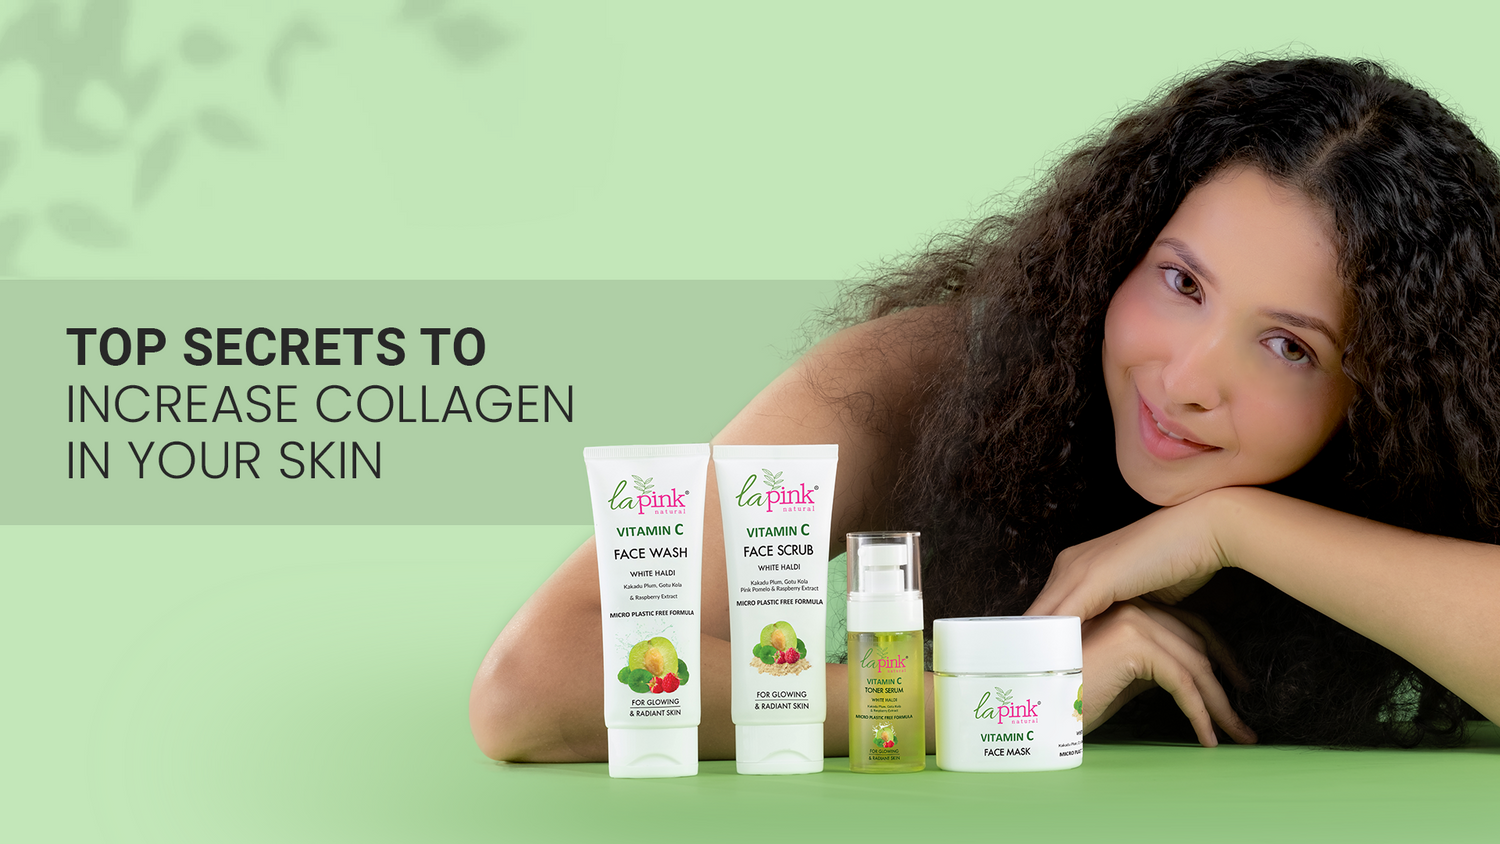 Top Secrets to Increase Collagen in your Skin